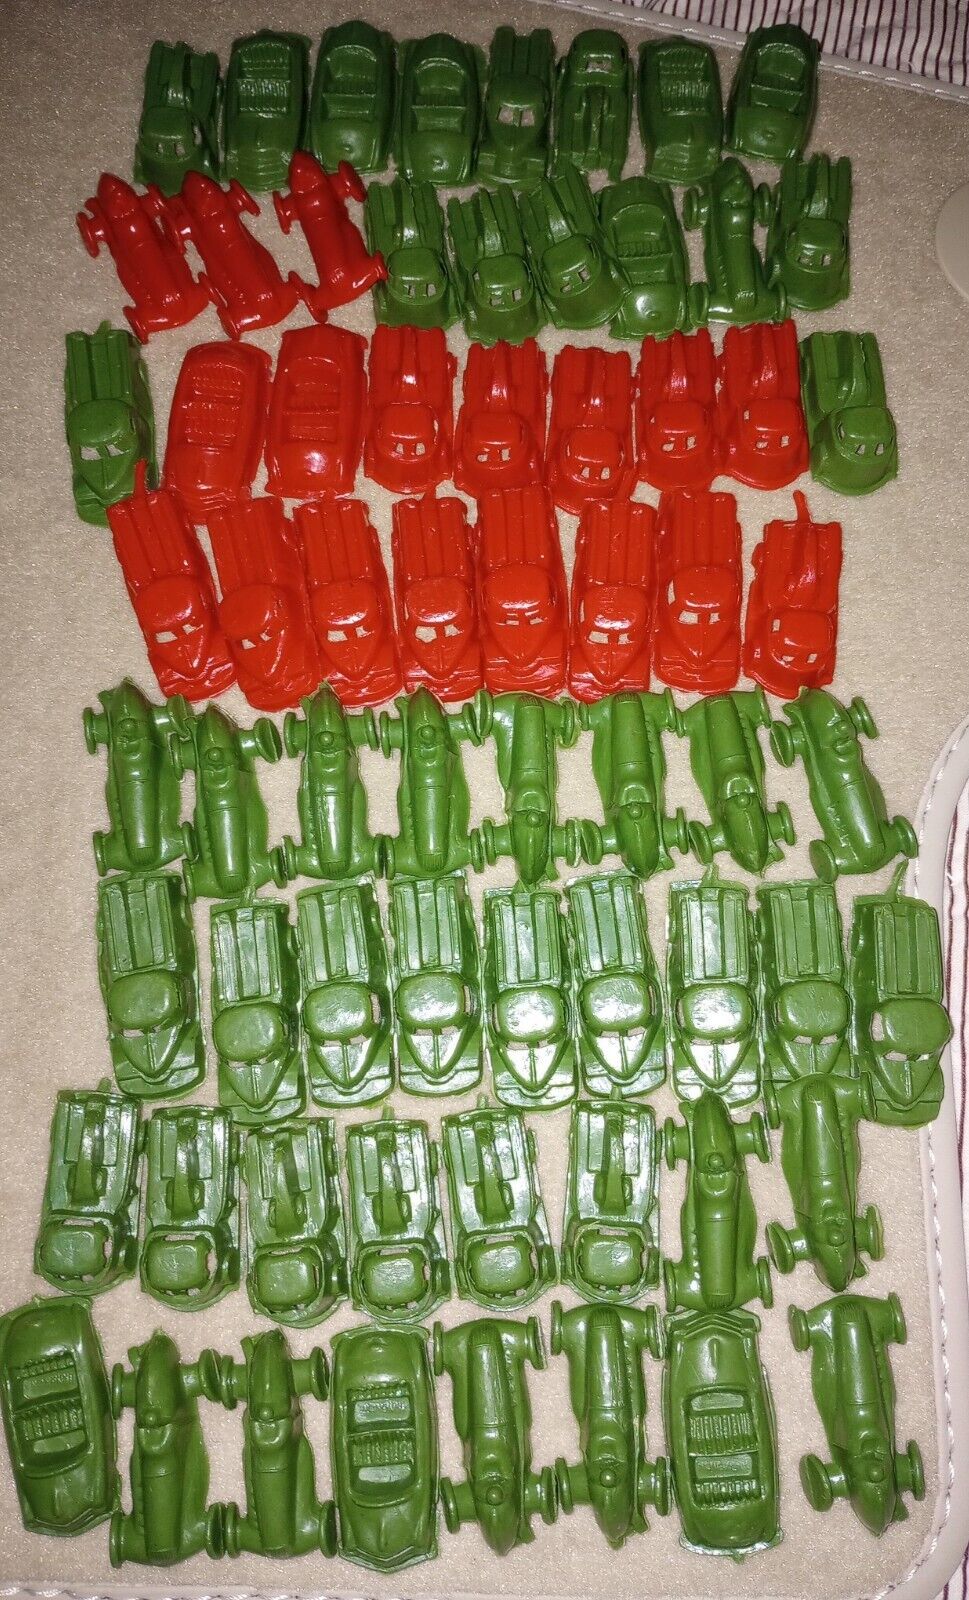 60+ Red Green Toy PLASTIC CARS TRUCKS FOR VENDING MACHINE VINTAGE NOS @1.5\